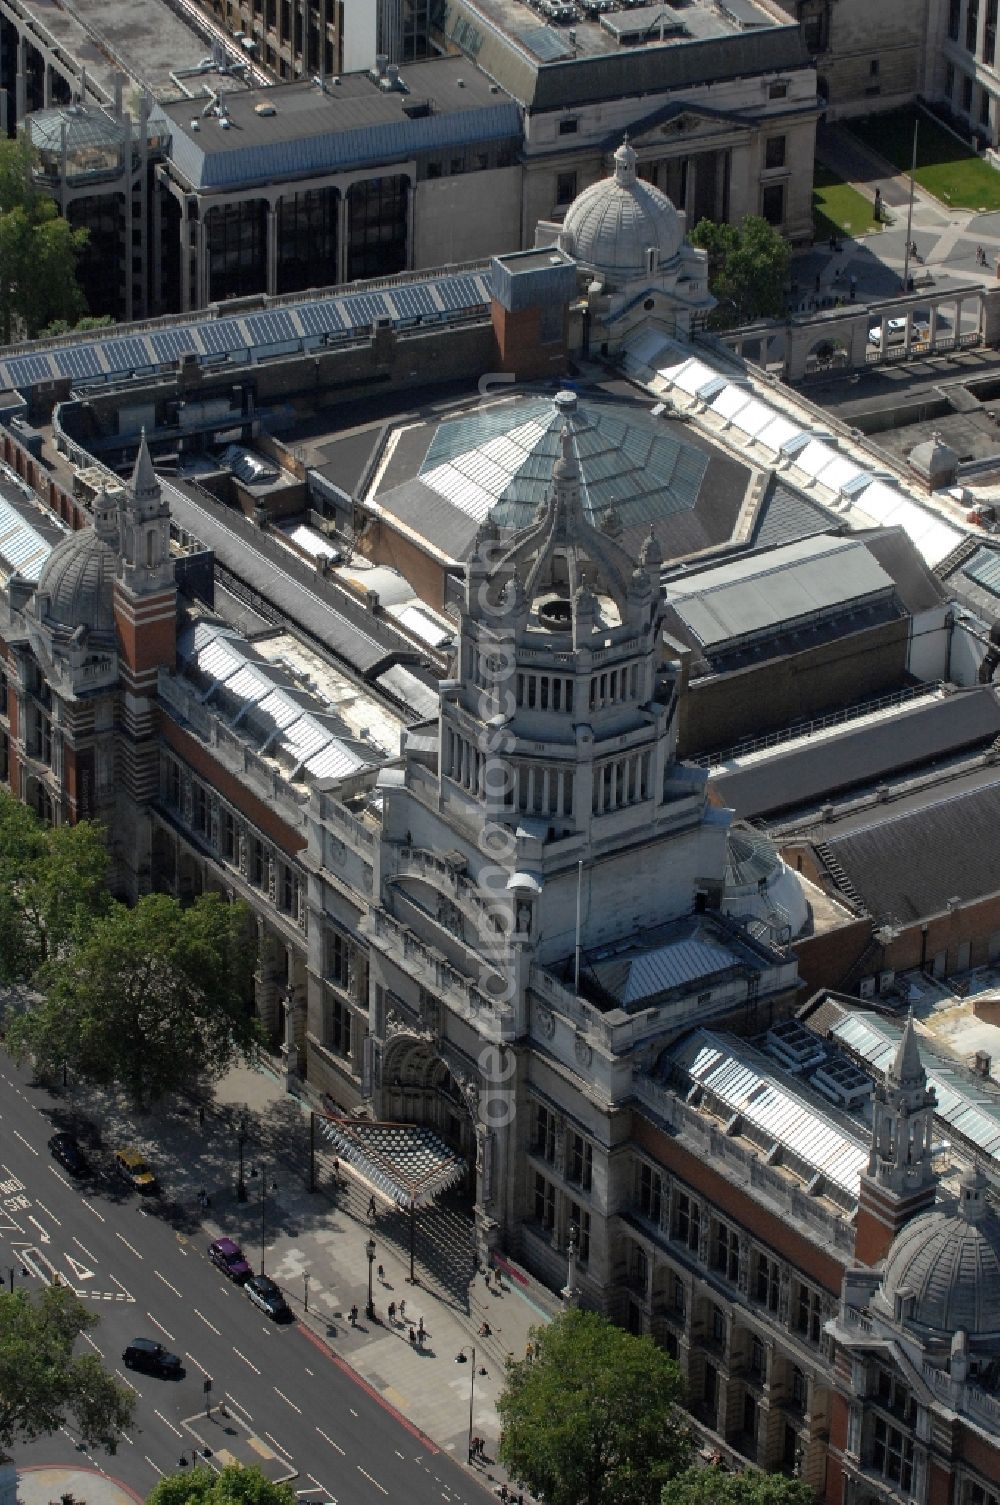 Aerial image London - View of the Victoria and Albert Museum in London. The Victoria and Albert Museum, which was founded in 1852 known as the South Kensington Museum, is located on Cromwell Road in Kensington, West London and owns the largest collection of decorative arts and design in the world. It was visited by 2.6 million people in 2010. Since 1 September 2011, it is led by Martin Roth, the former Director General of the State Art Collections Dresden